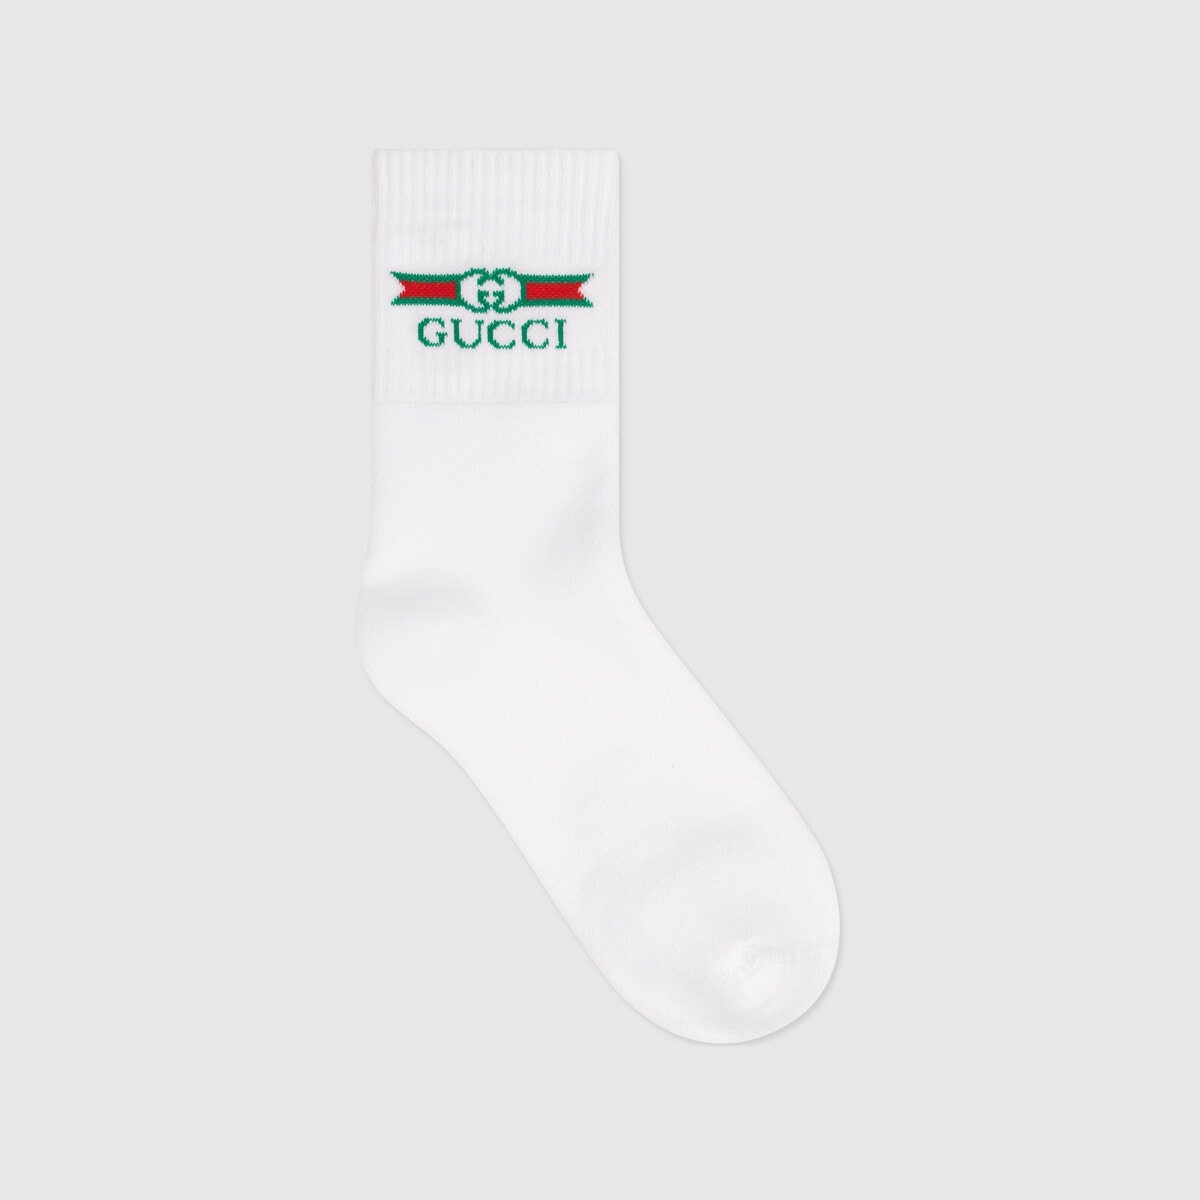 Cotton socks with Gucci label detail - 1